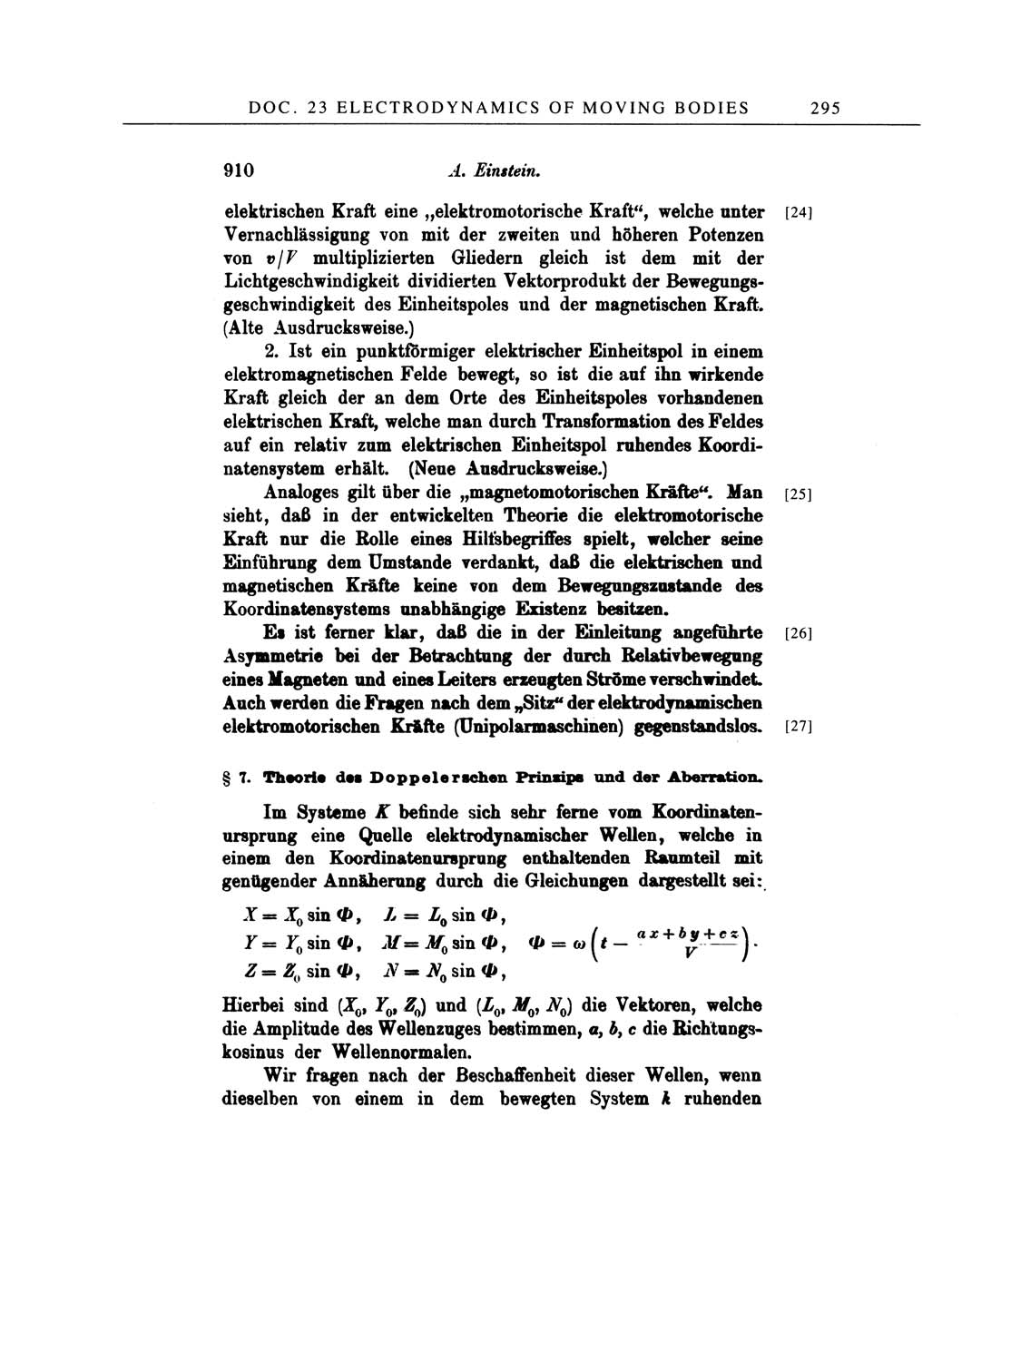 Volume 2: The Swiss Years: Writings, 1900-1909 page 295